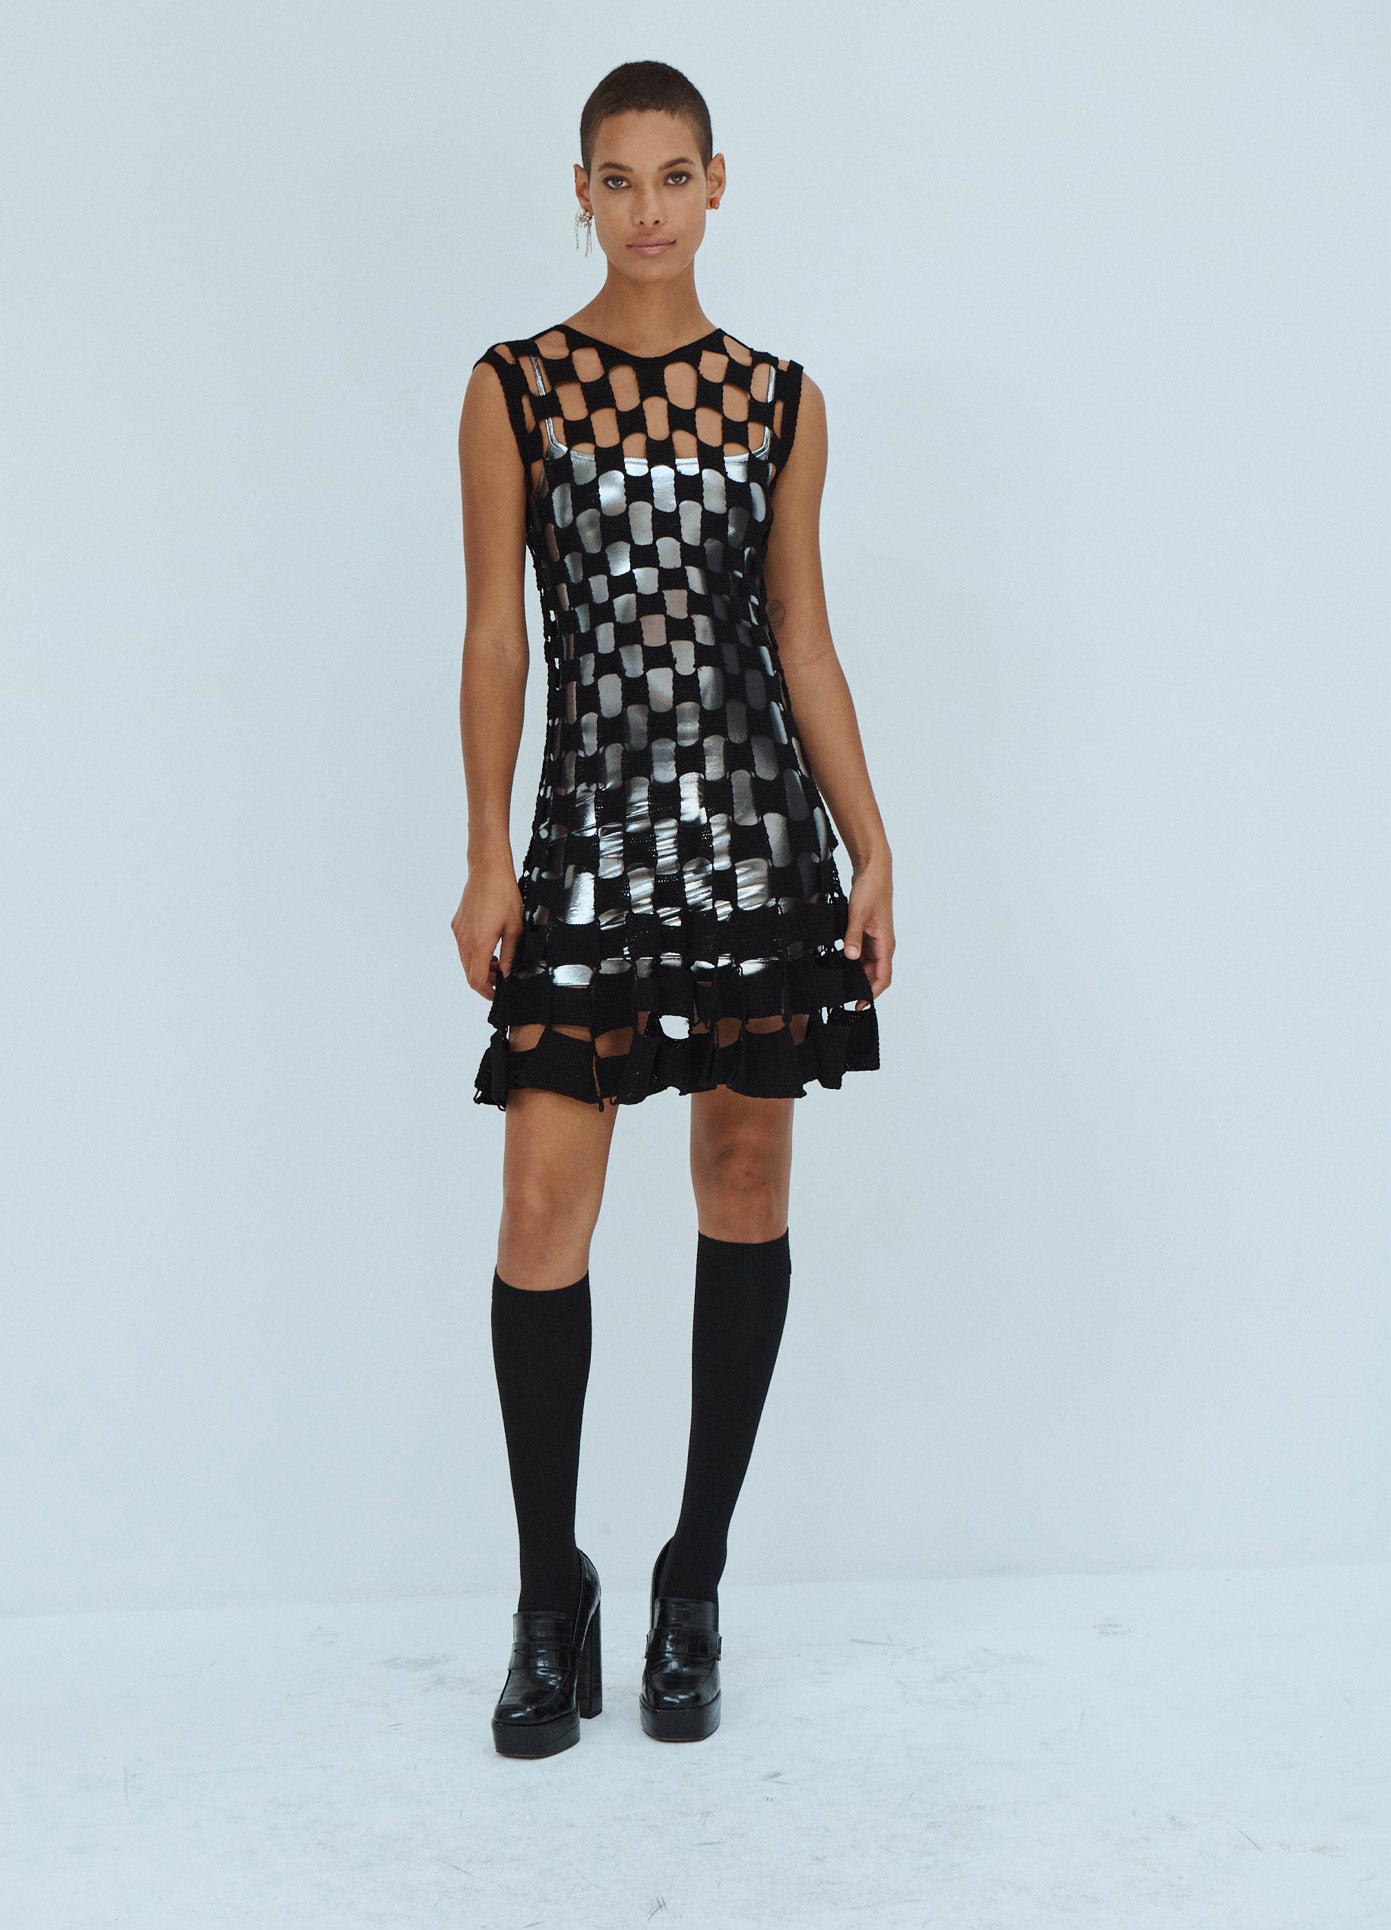 MONSE Square Crochet Dress in Black with Silver Lining on Model Front View